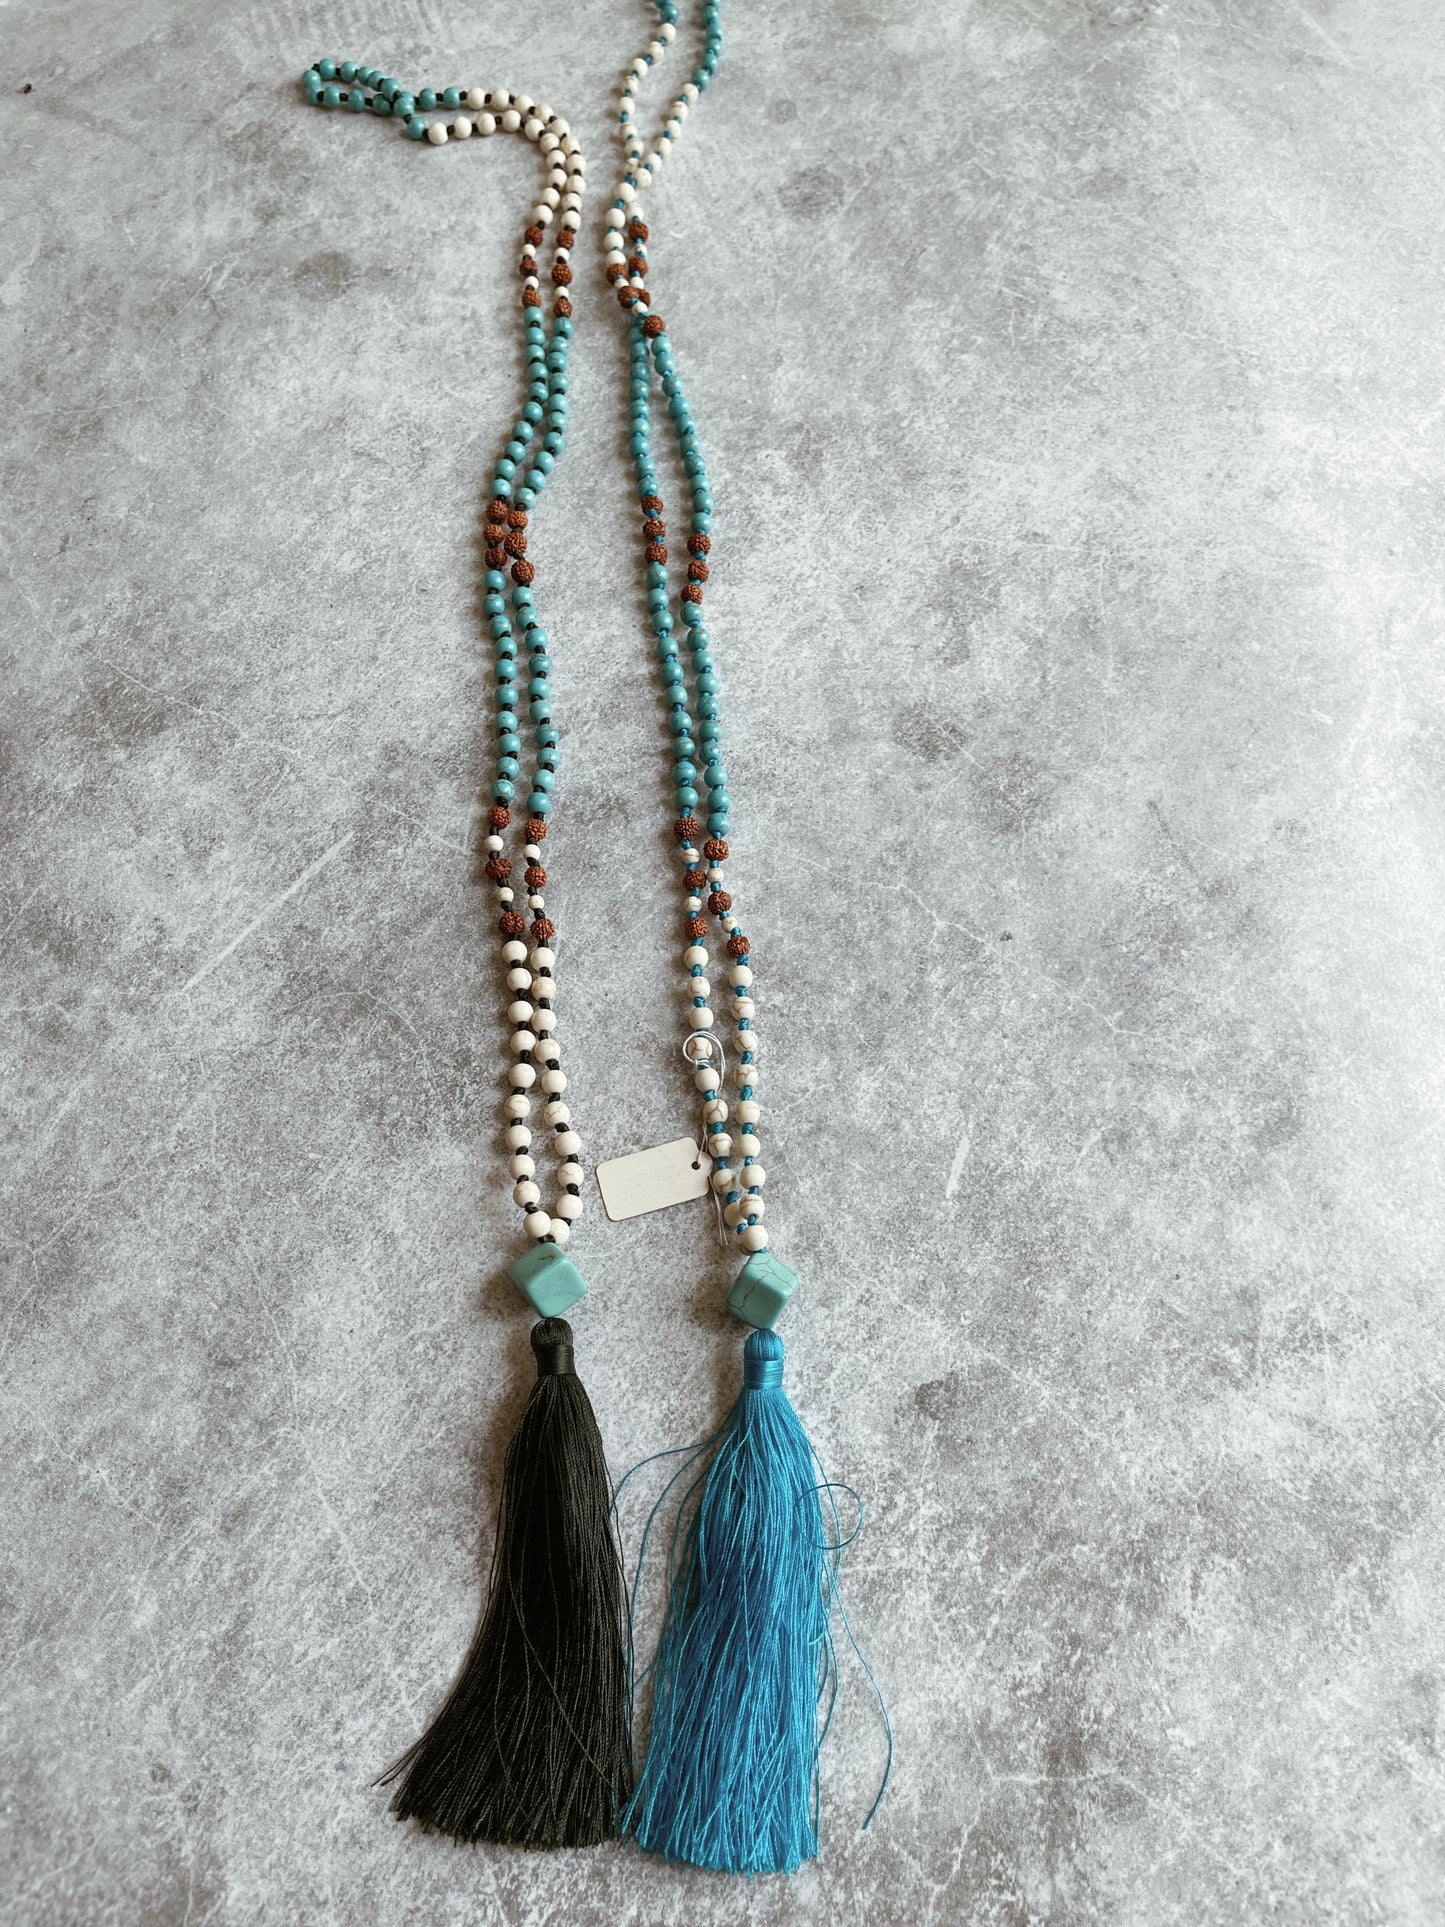 Turquoise Beaded Tassel Necklaces